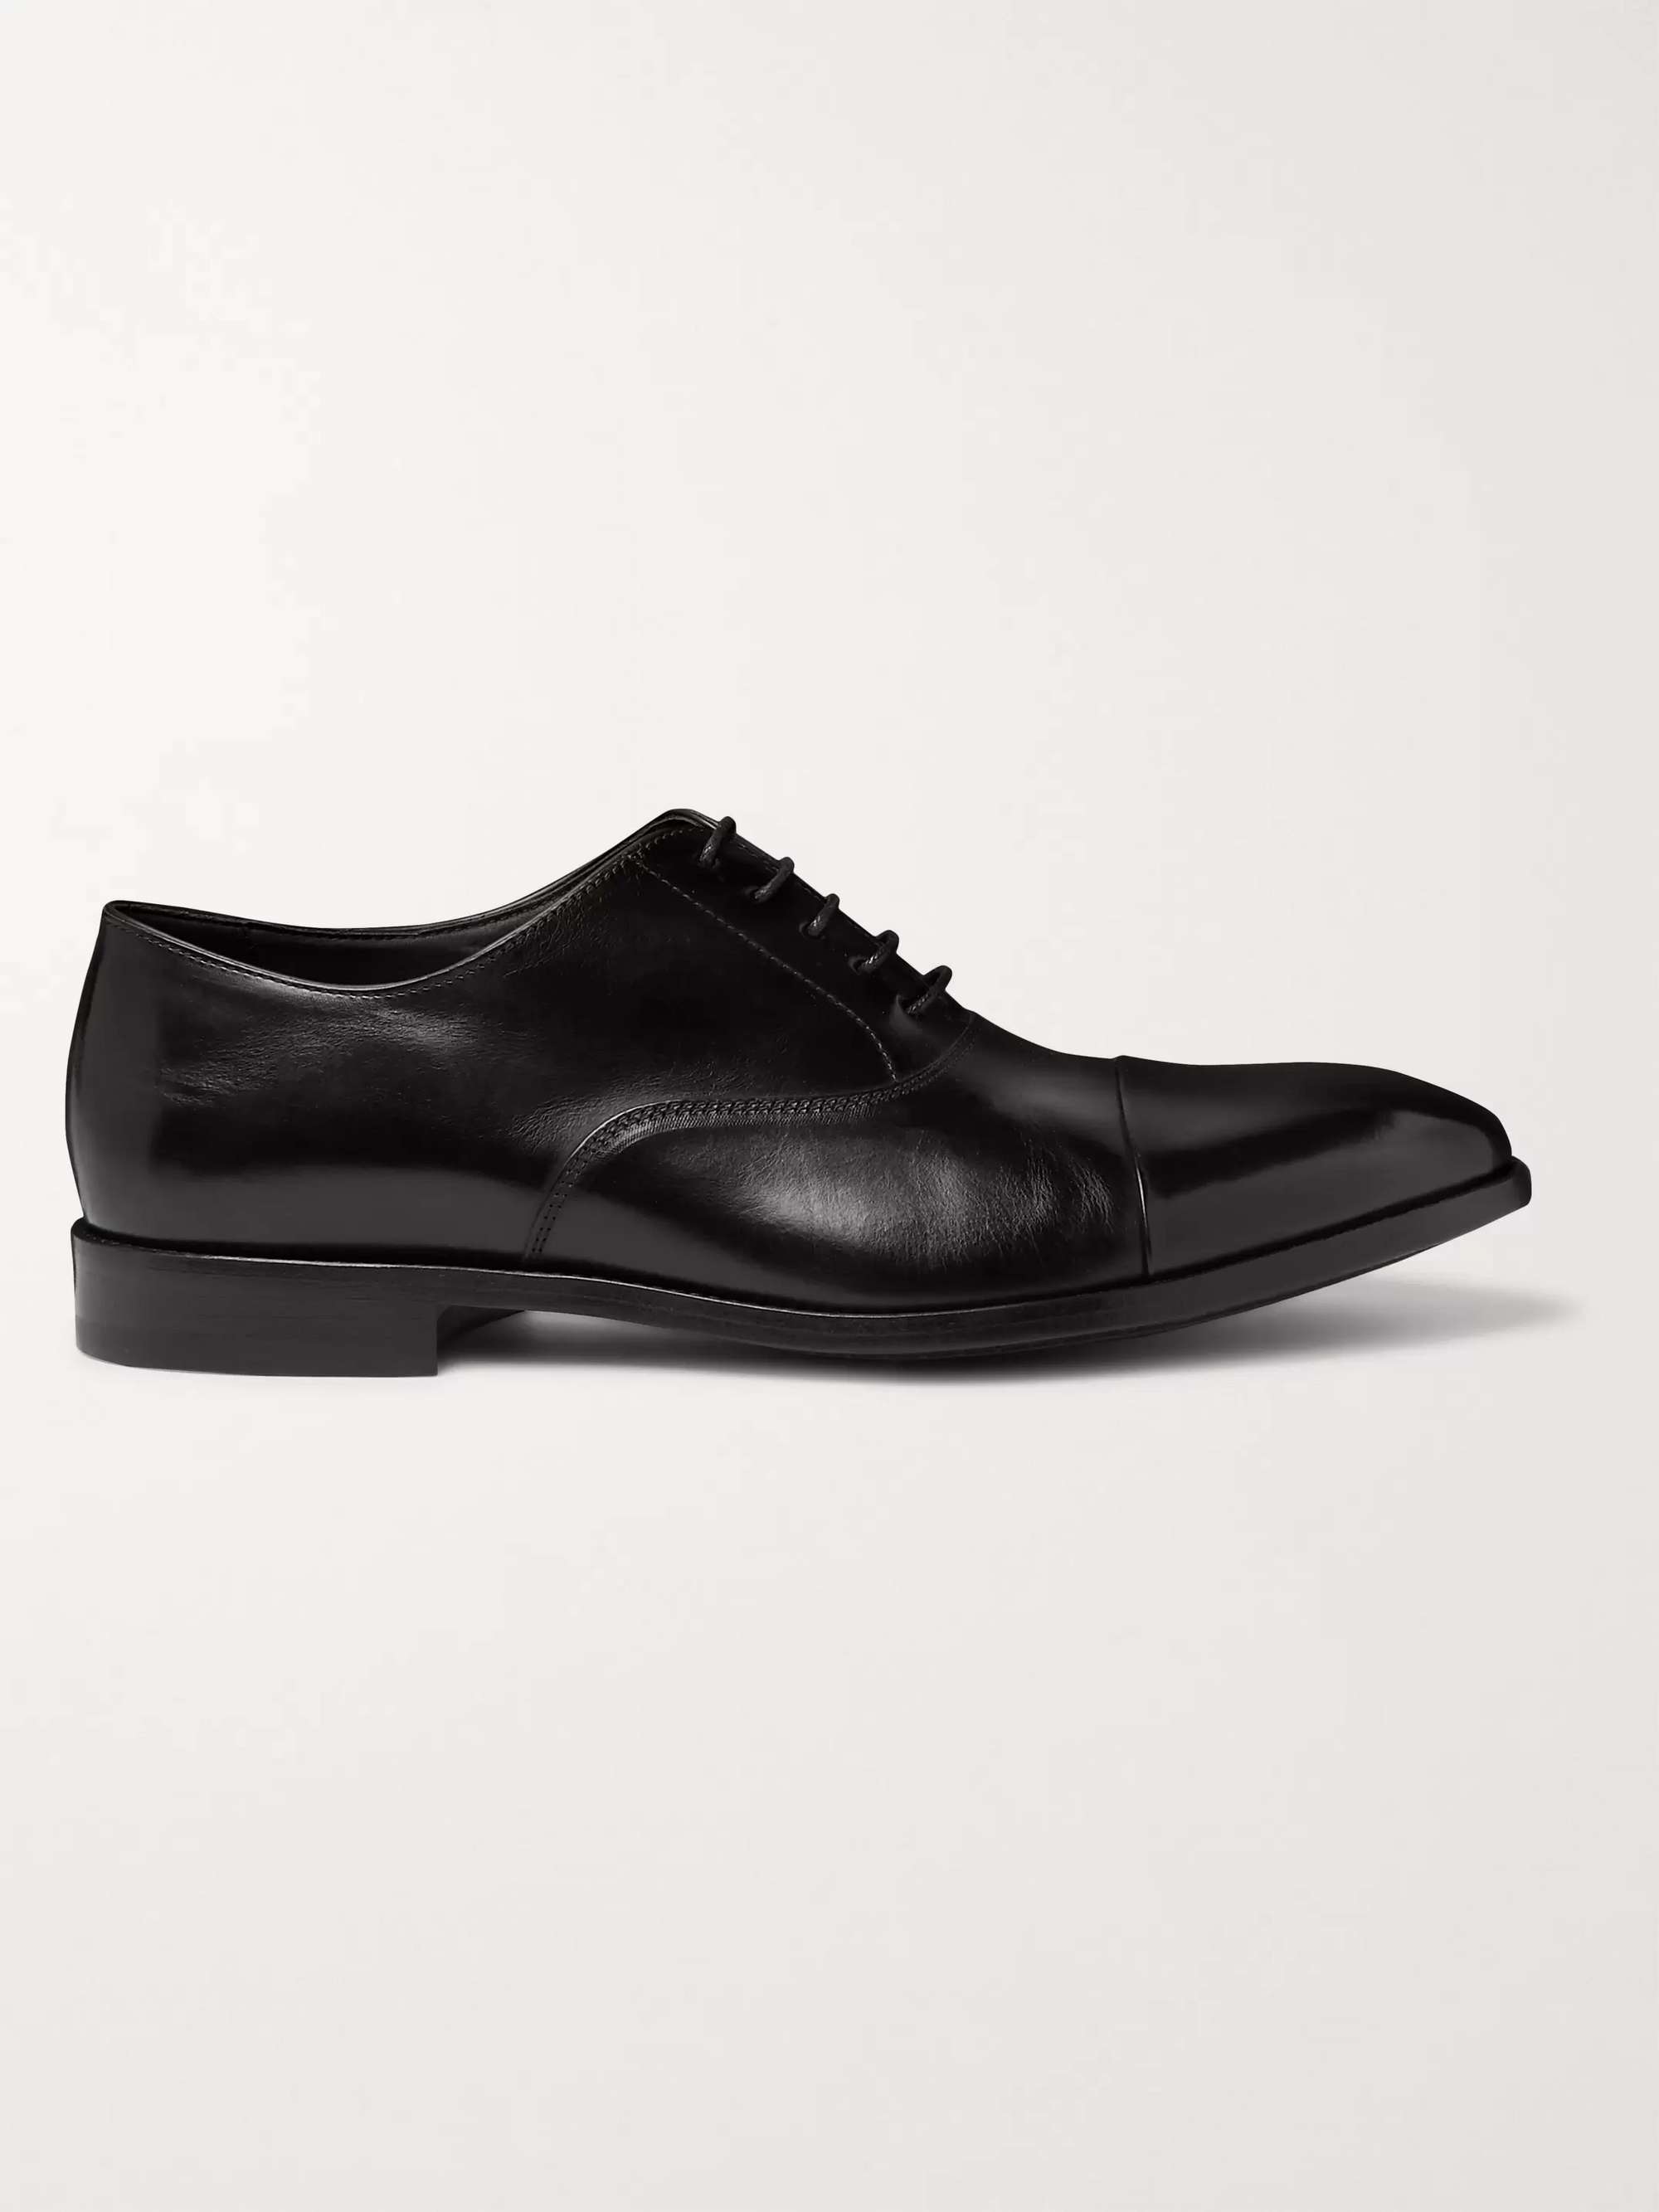 PAUL SMITH Brent Leather Oxford Shoes | MR PORTER